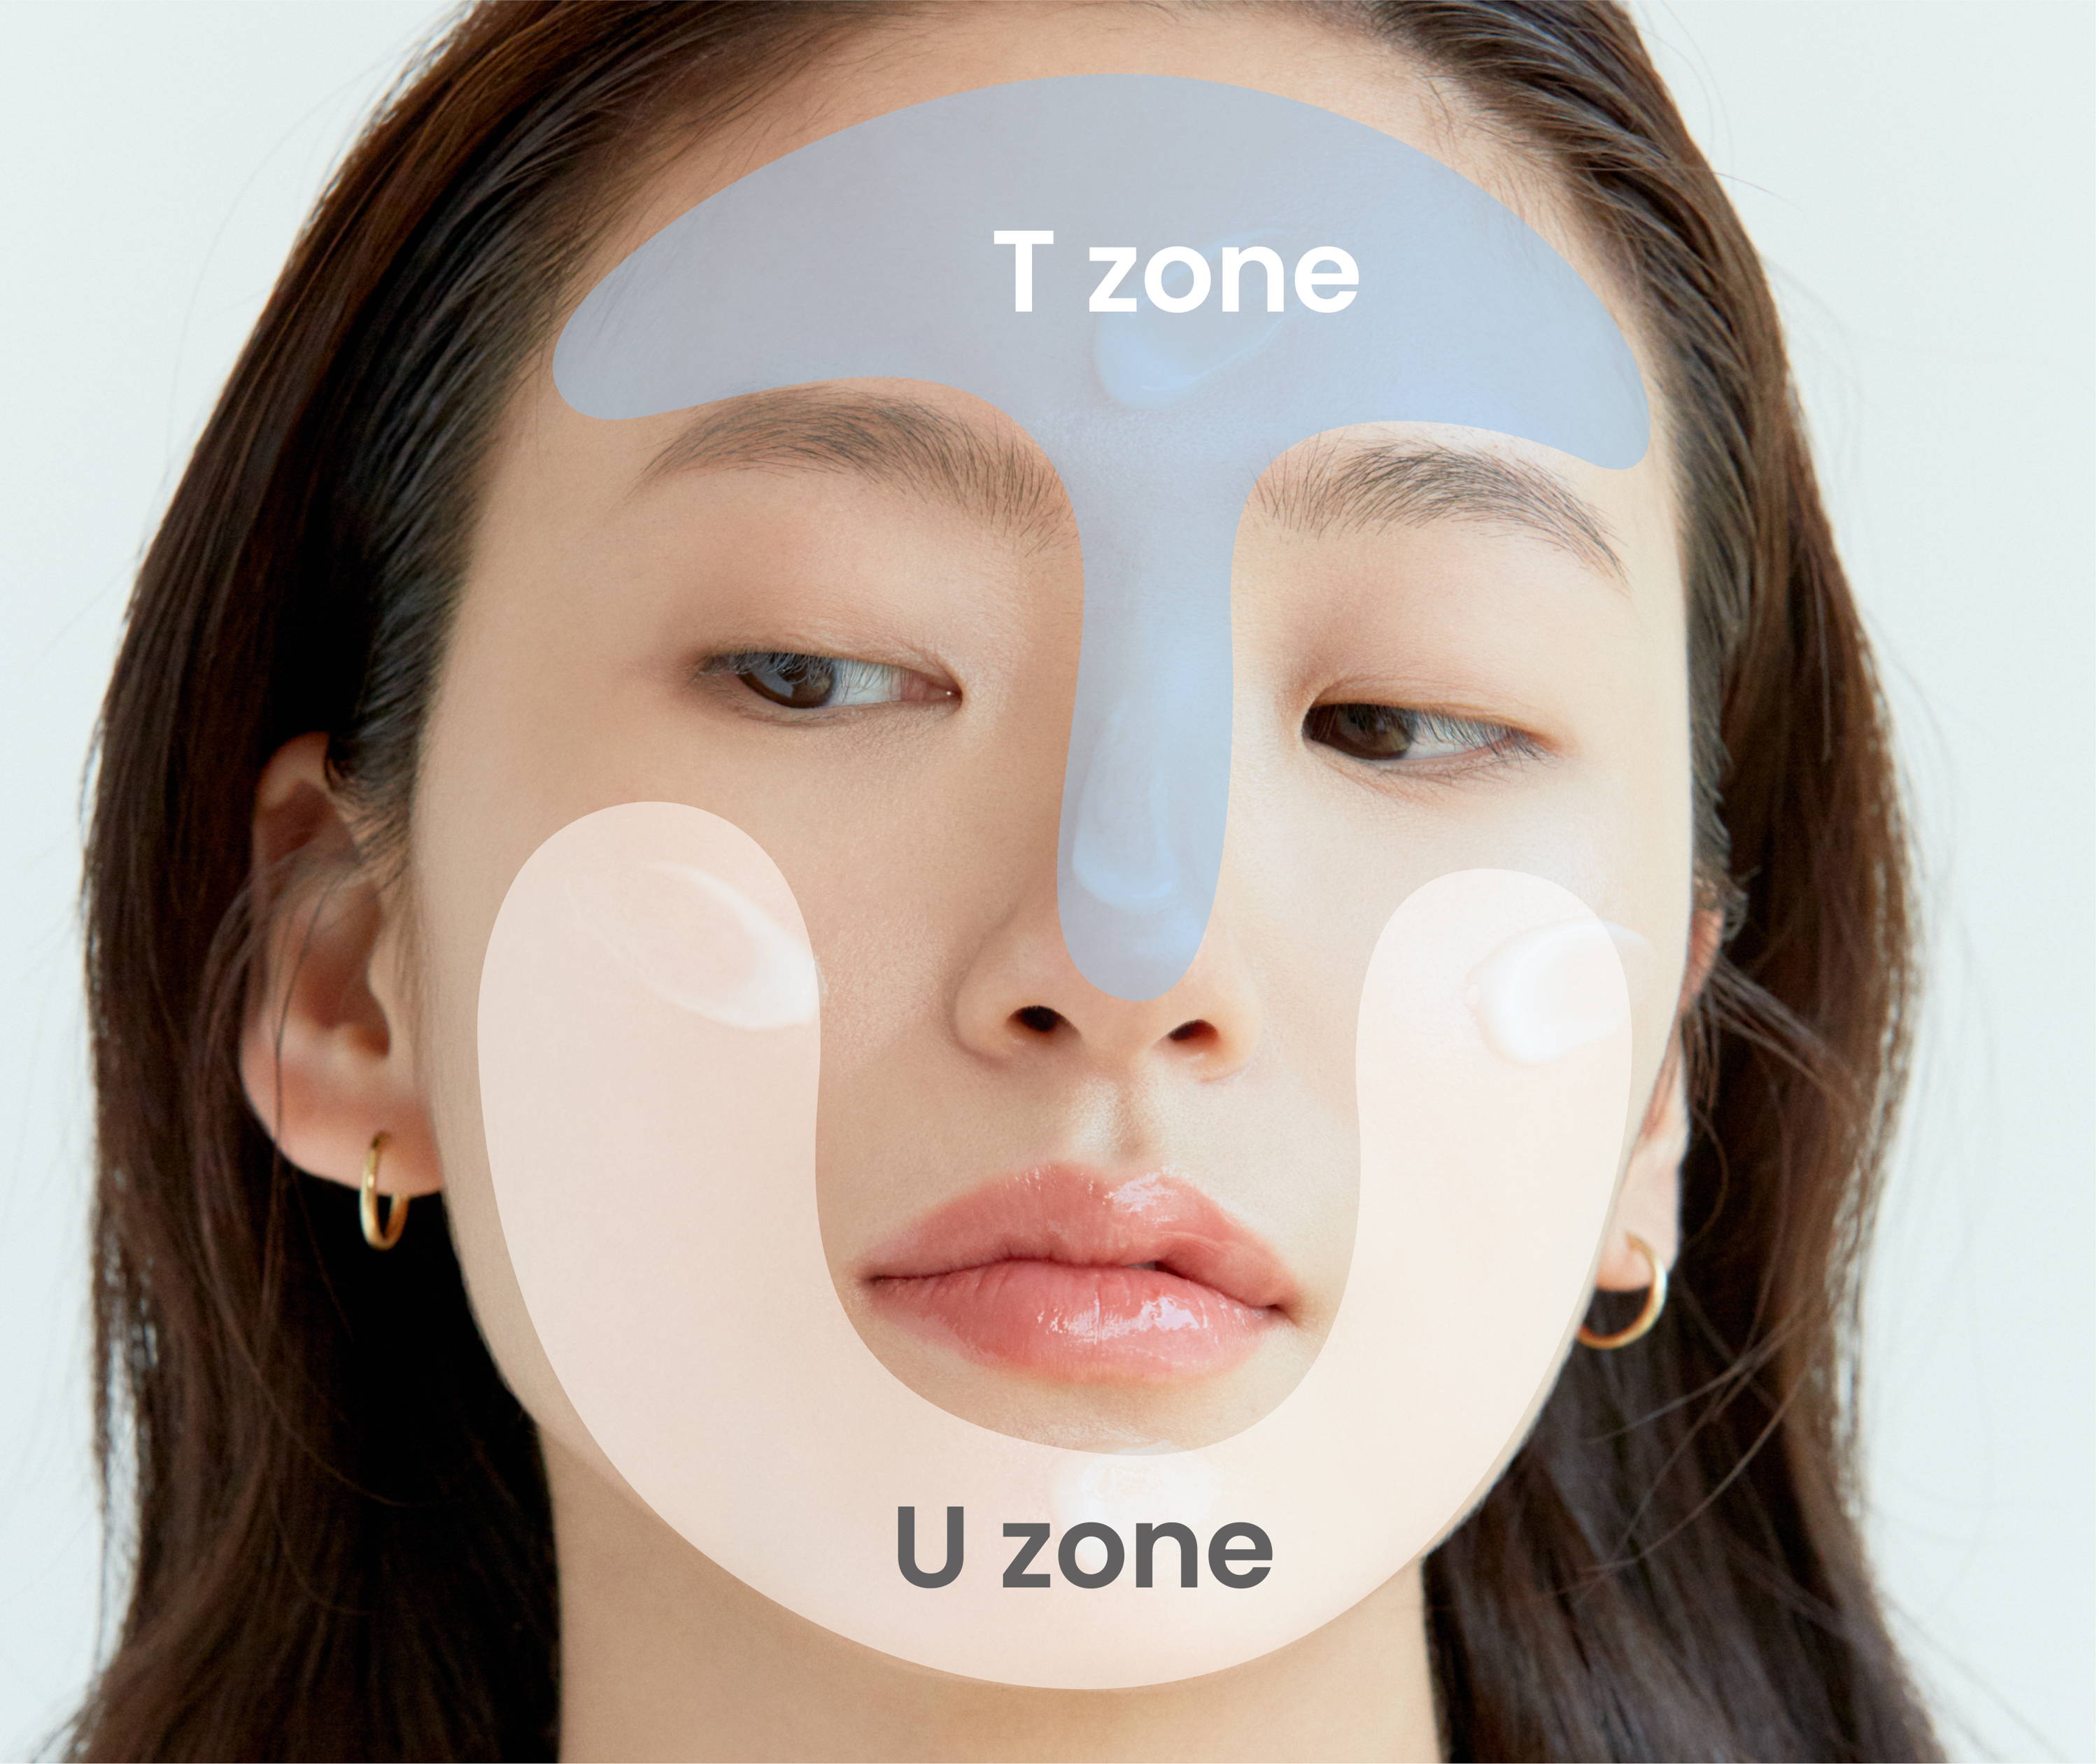 Image and graphic showing the T zone and U zone of the face